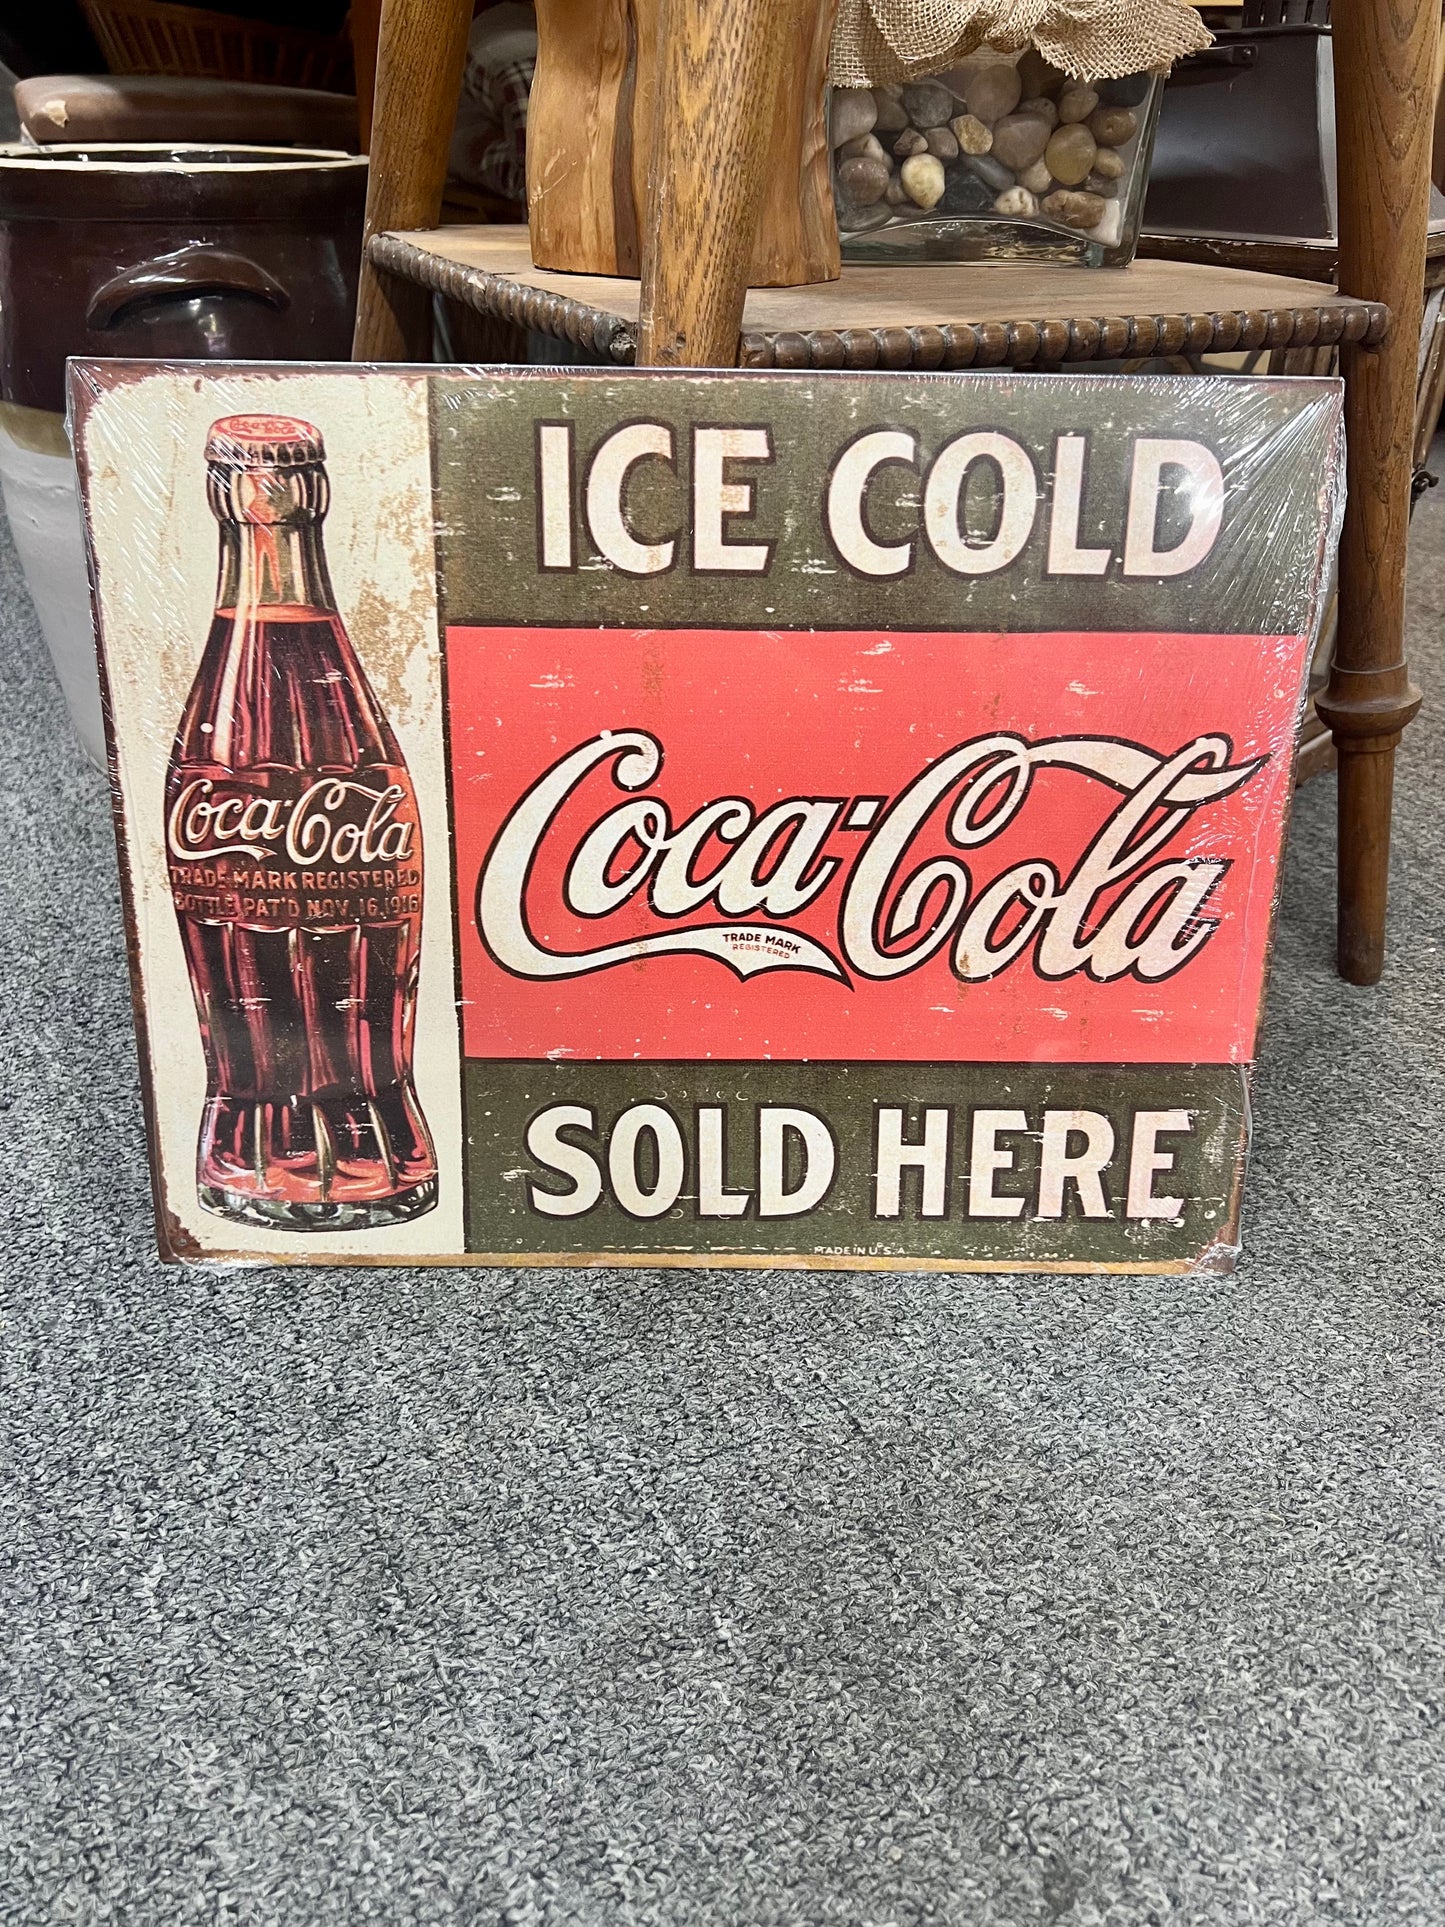 Coca Cola Ice Cold Sold Here Metal Sign